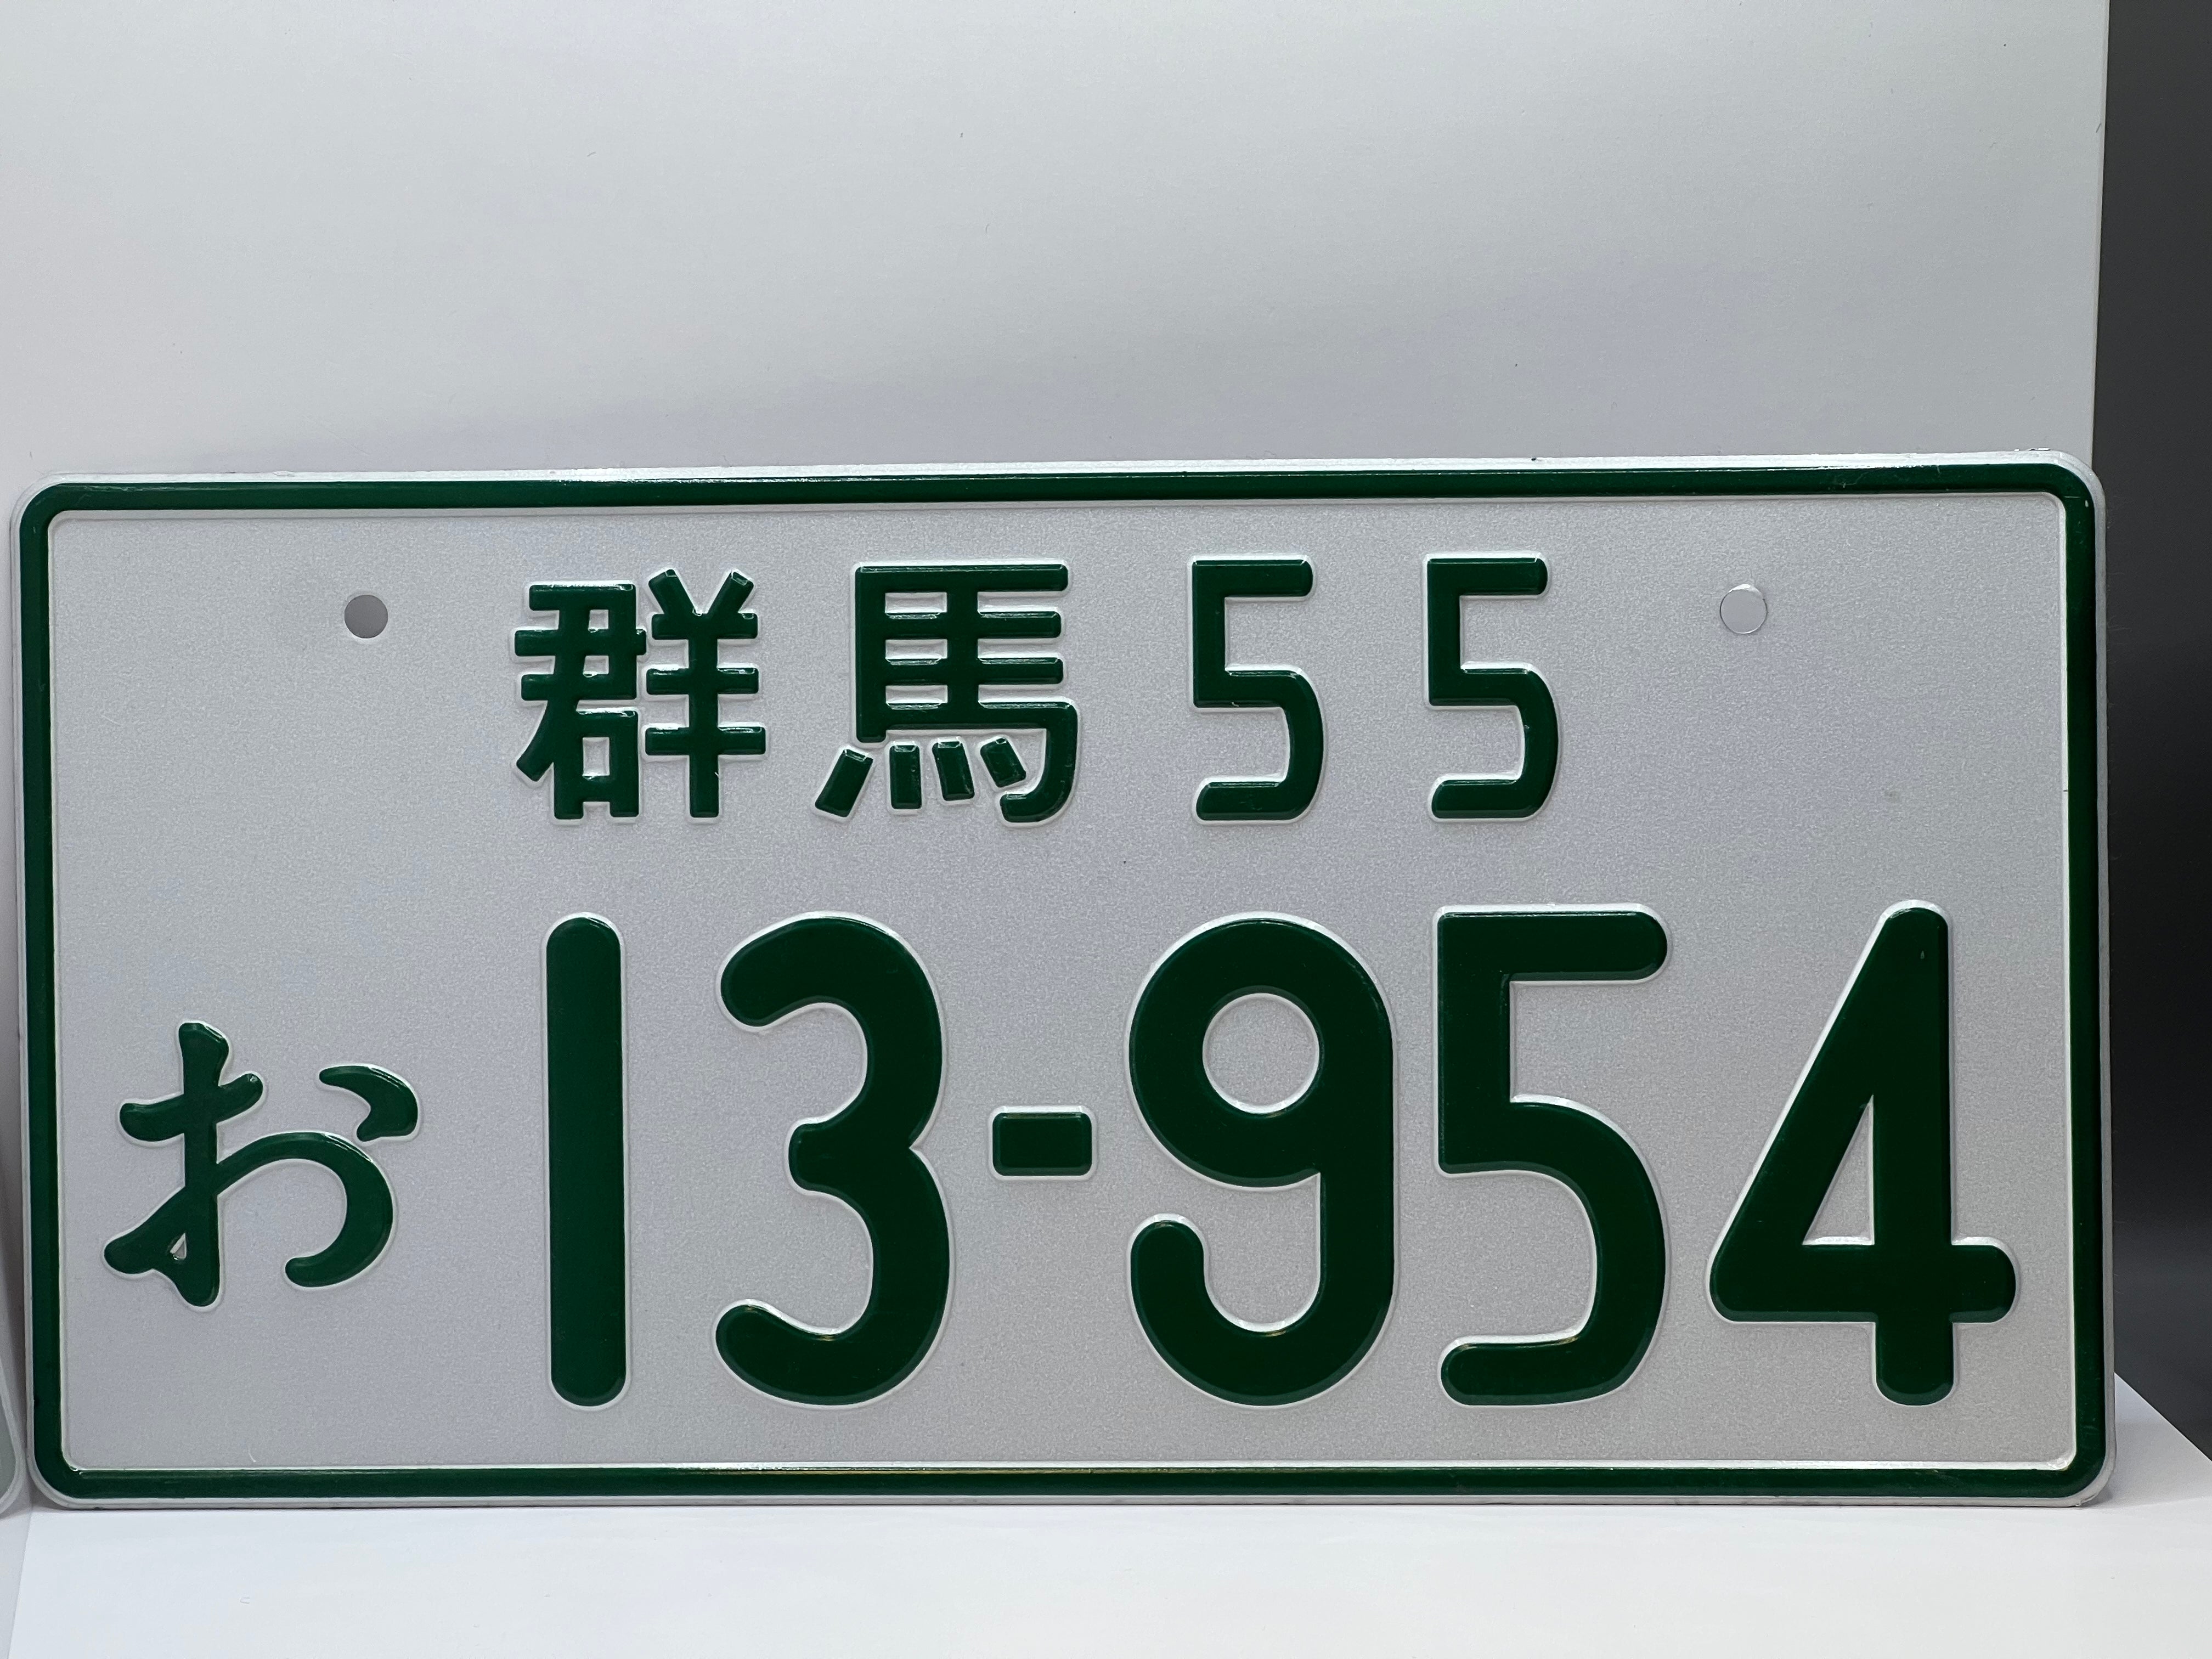 Takumi's license plate 13-954 from Initial D-High quality metal plate for fans